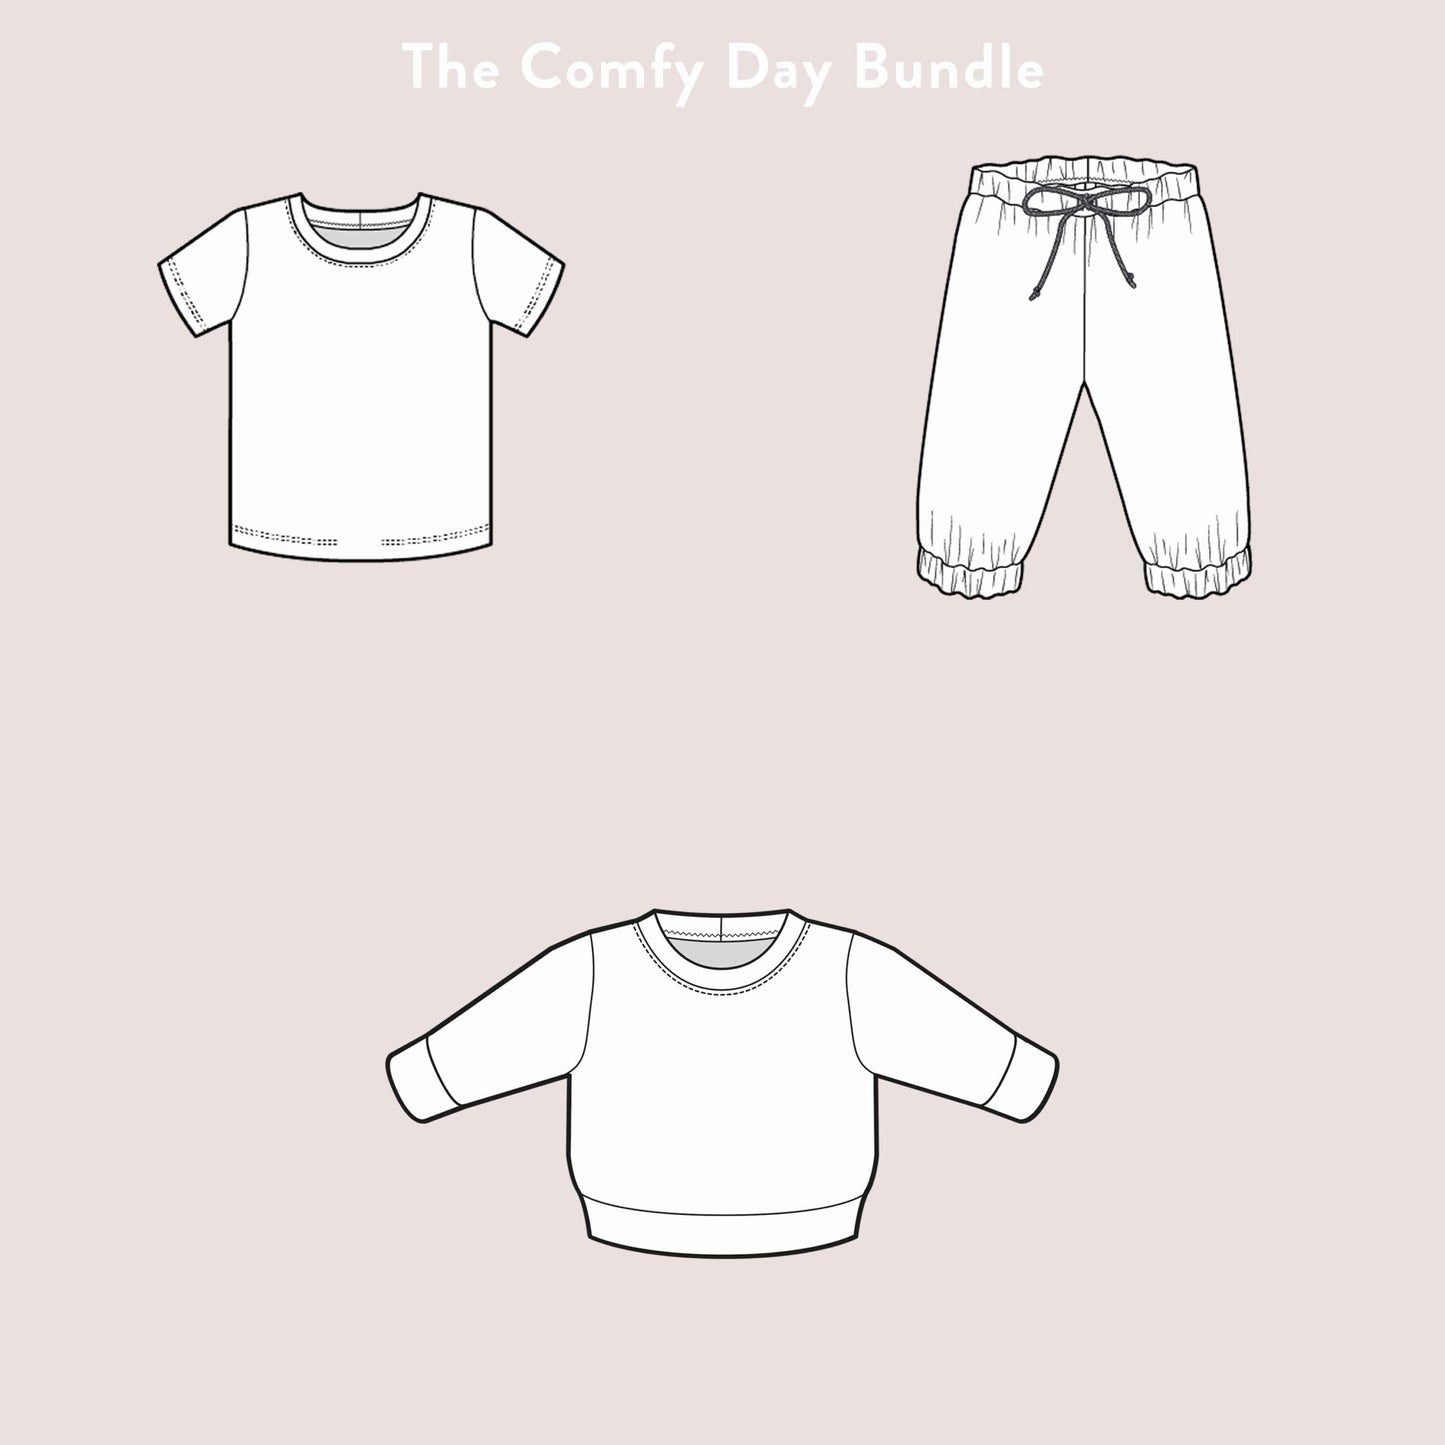 The Comfy Day Bundle